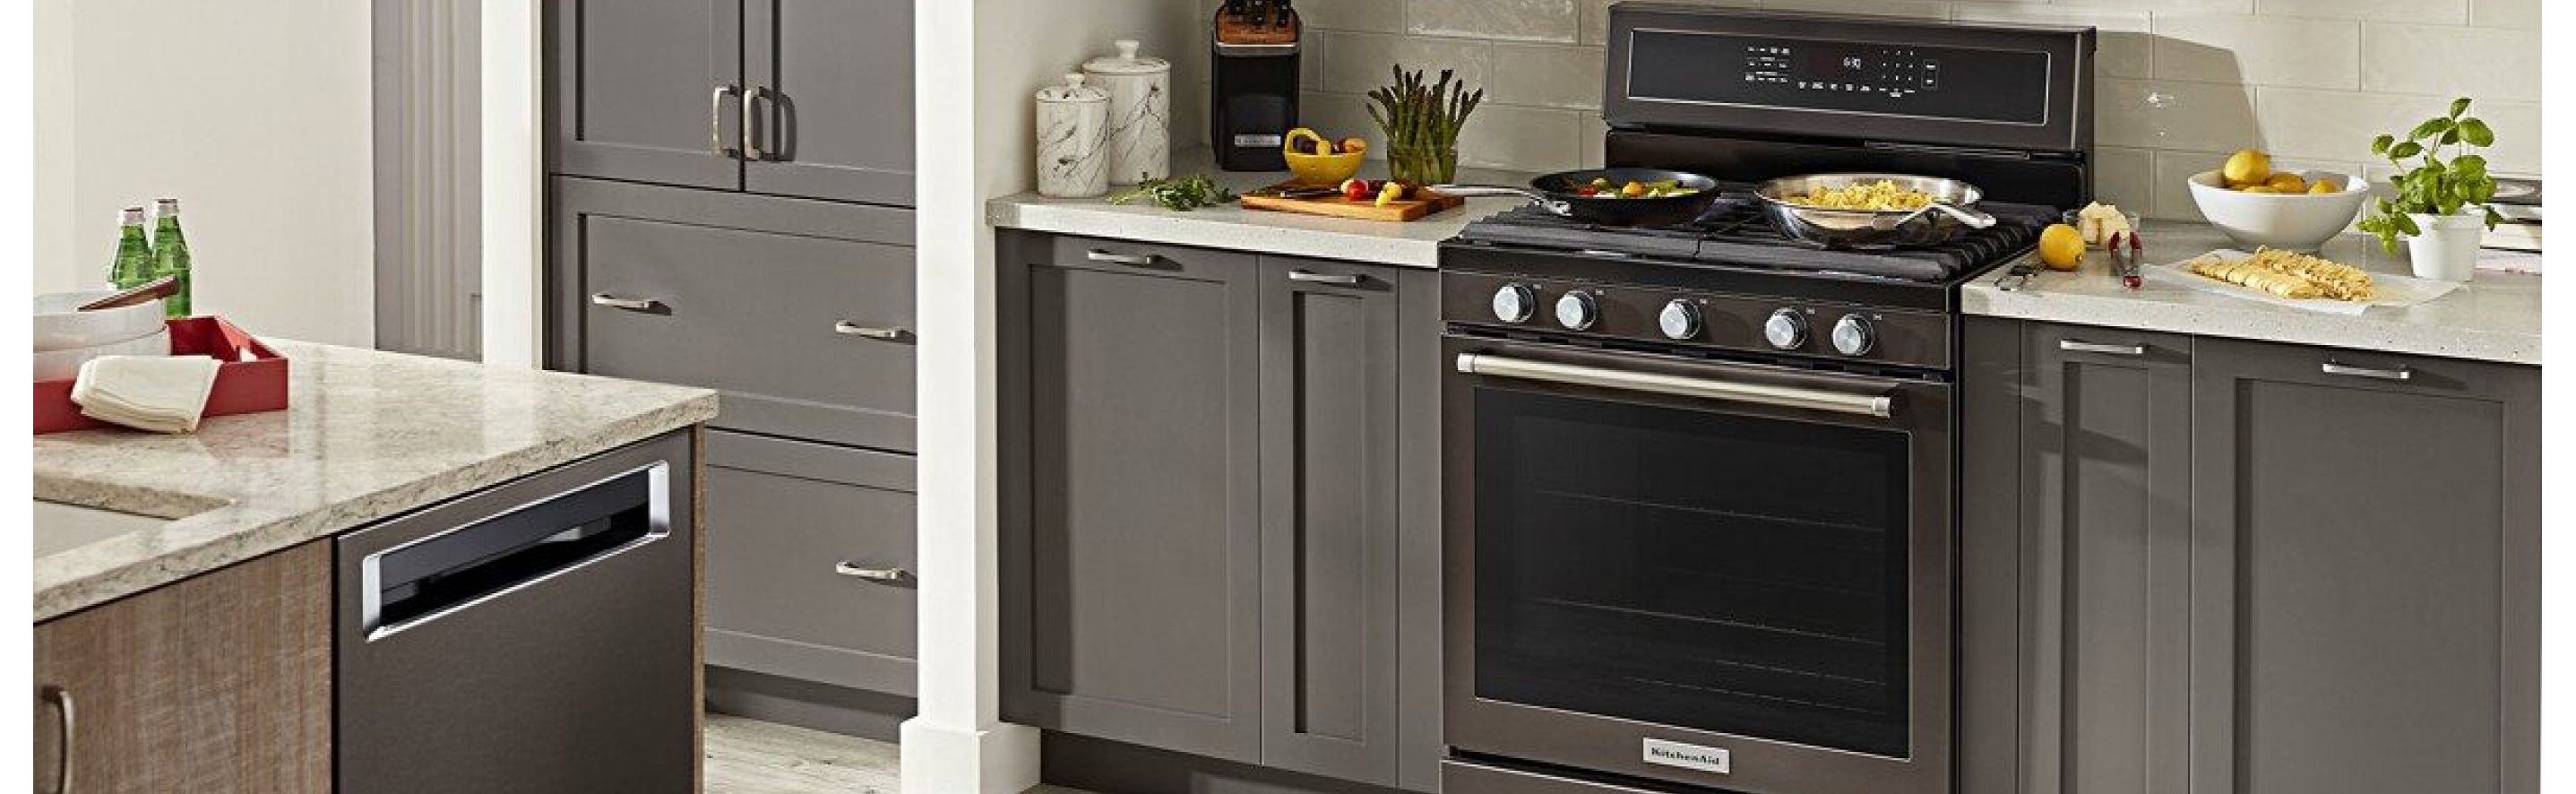 Madison oosters Blanco Types of Ovens for Cooking and Baking | KitchenAid